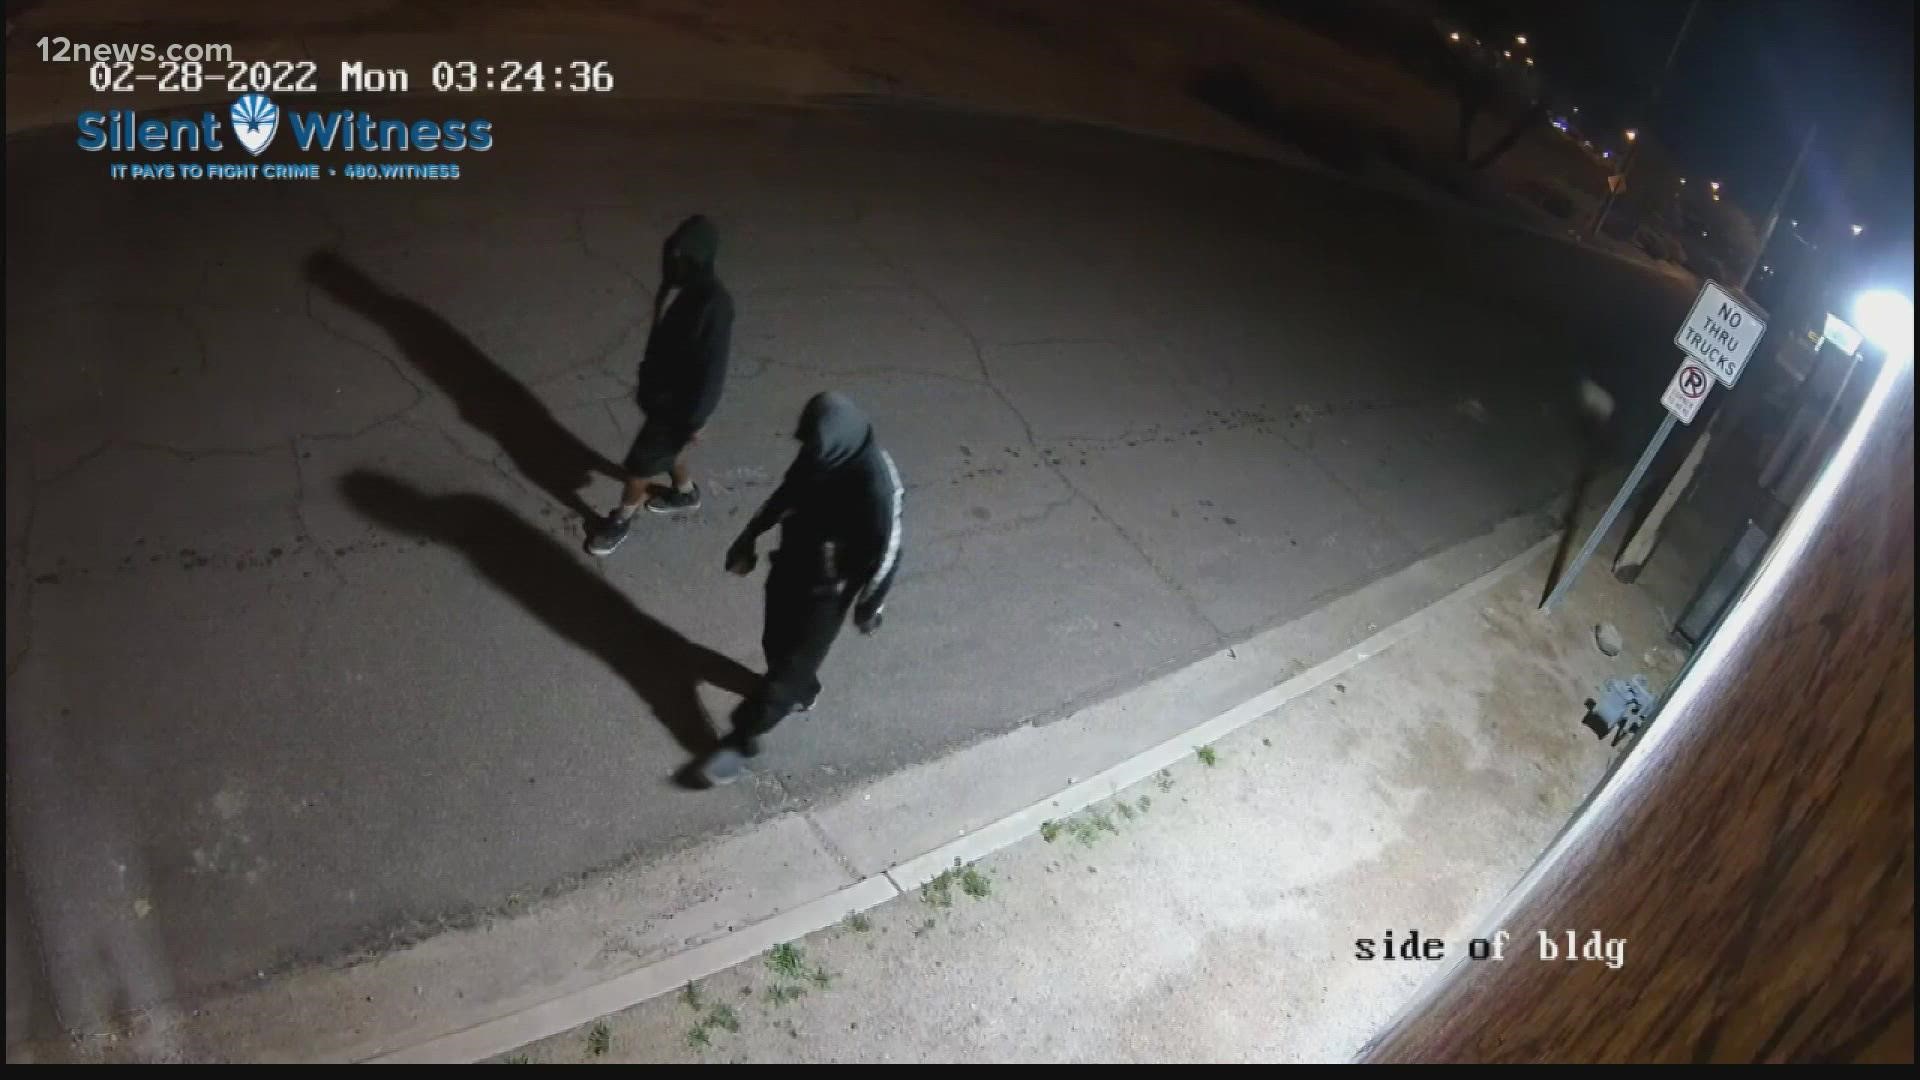 A $1,000 reward is available for information on two suspects who threw Molotov cocktails at a Phoenix restaurant, the Bread and Honey House, last month.